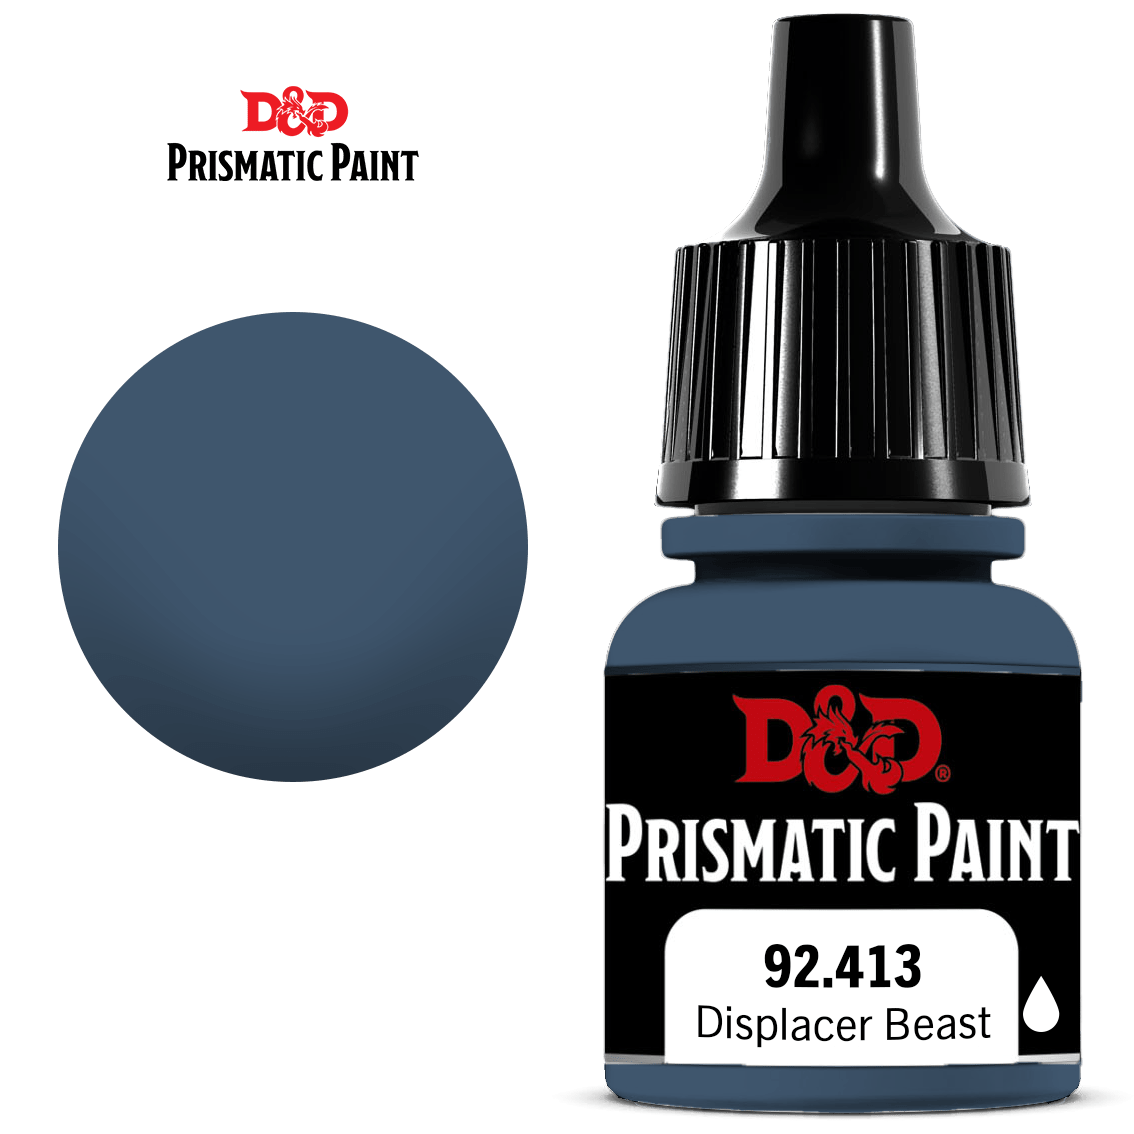 PRISMATIC PAINT: DISPLACER BEAST | BD Cosmos